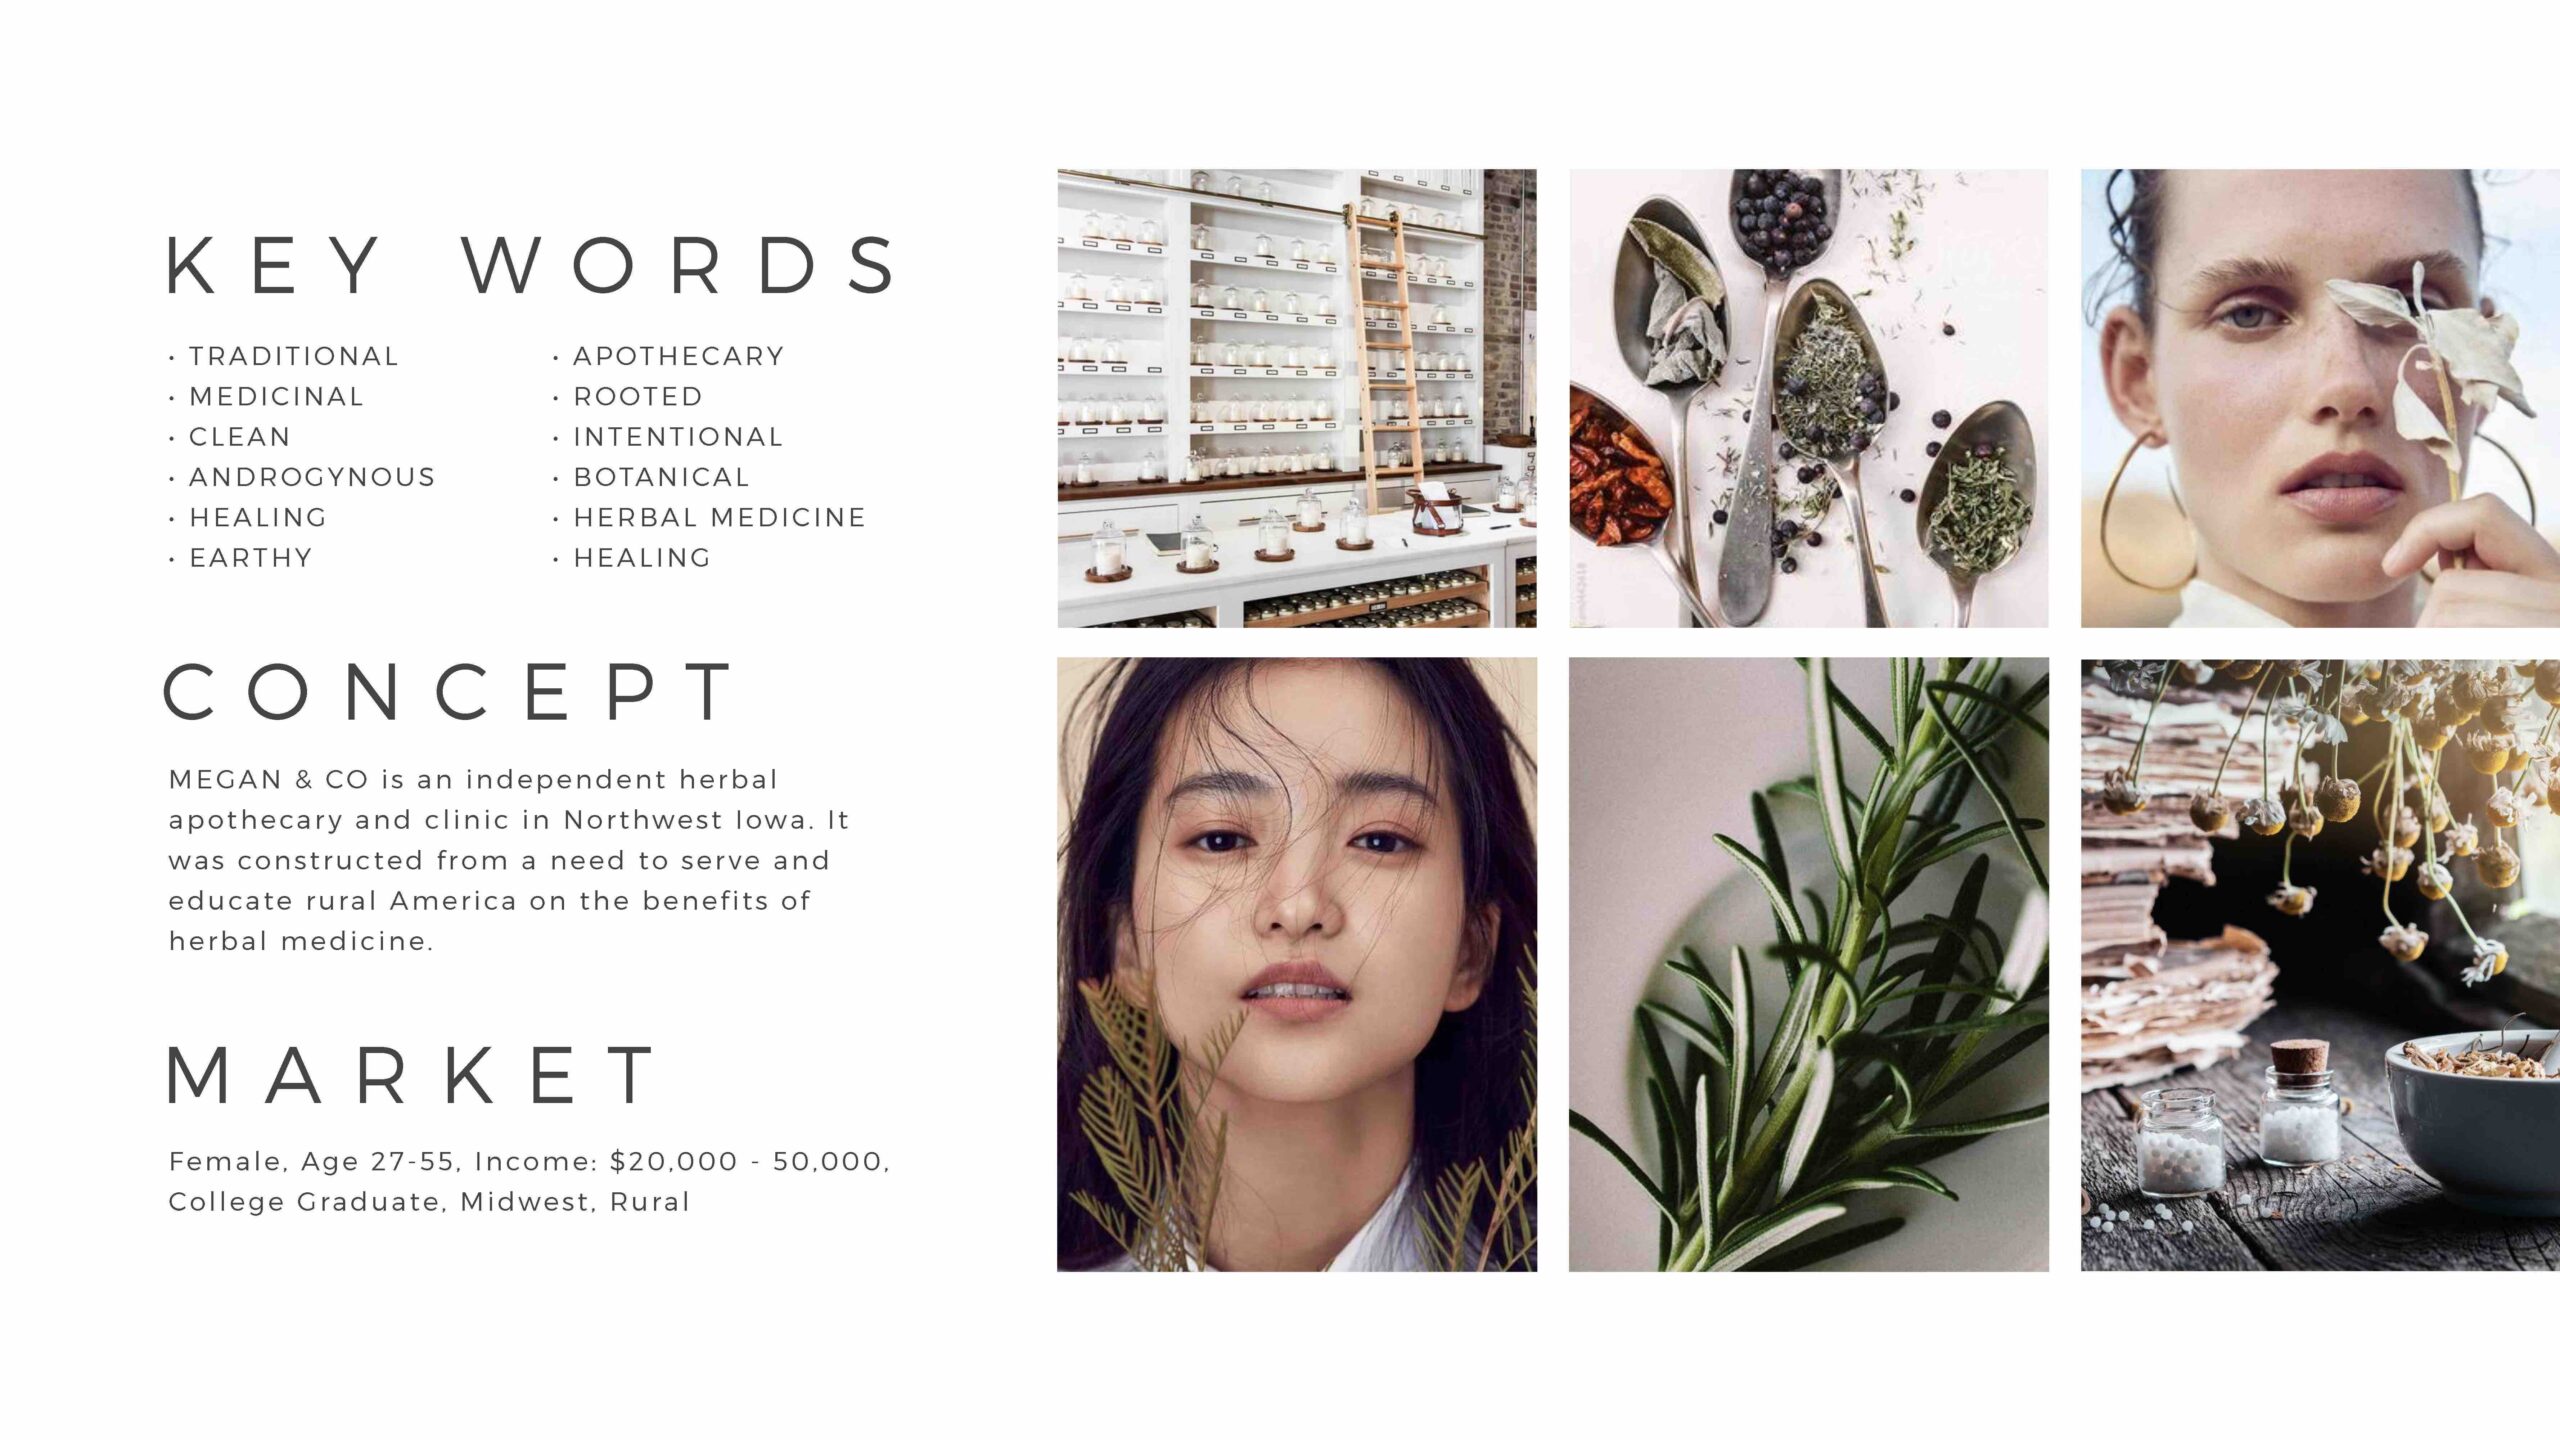 Megan Co the Herbal Apothecary brand presentation with keywords, concept, and market as well as earthy images.